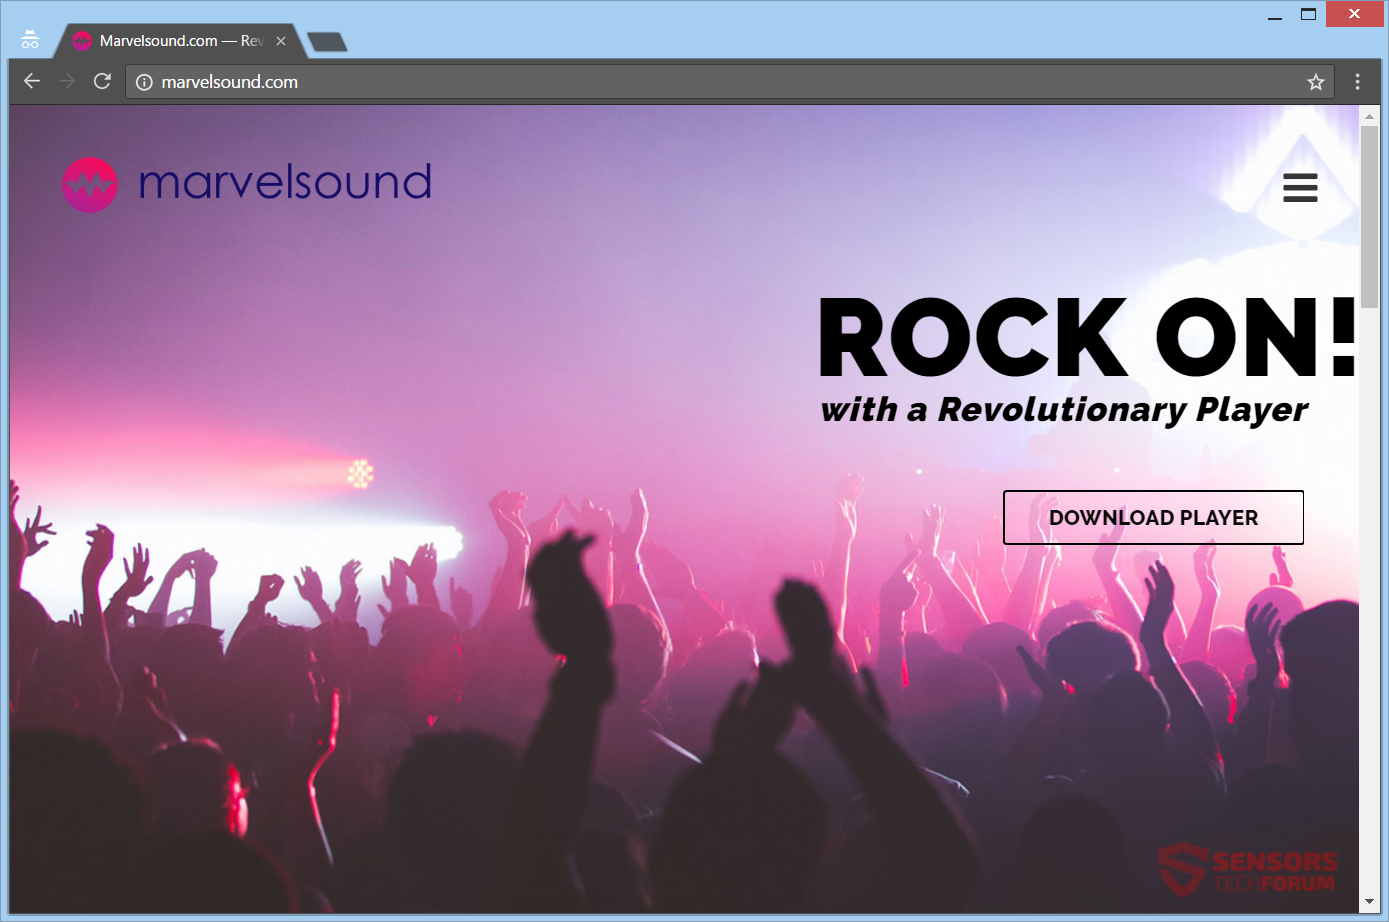 stf-marvelsound-com-marvel-sound-ads-ad-network-main-site-page